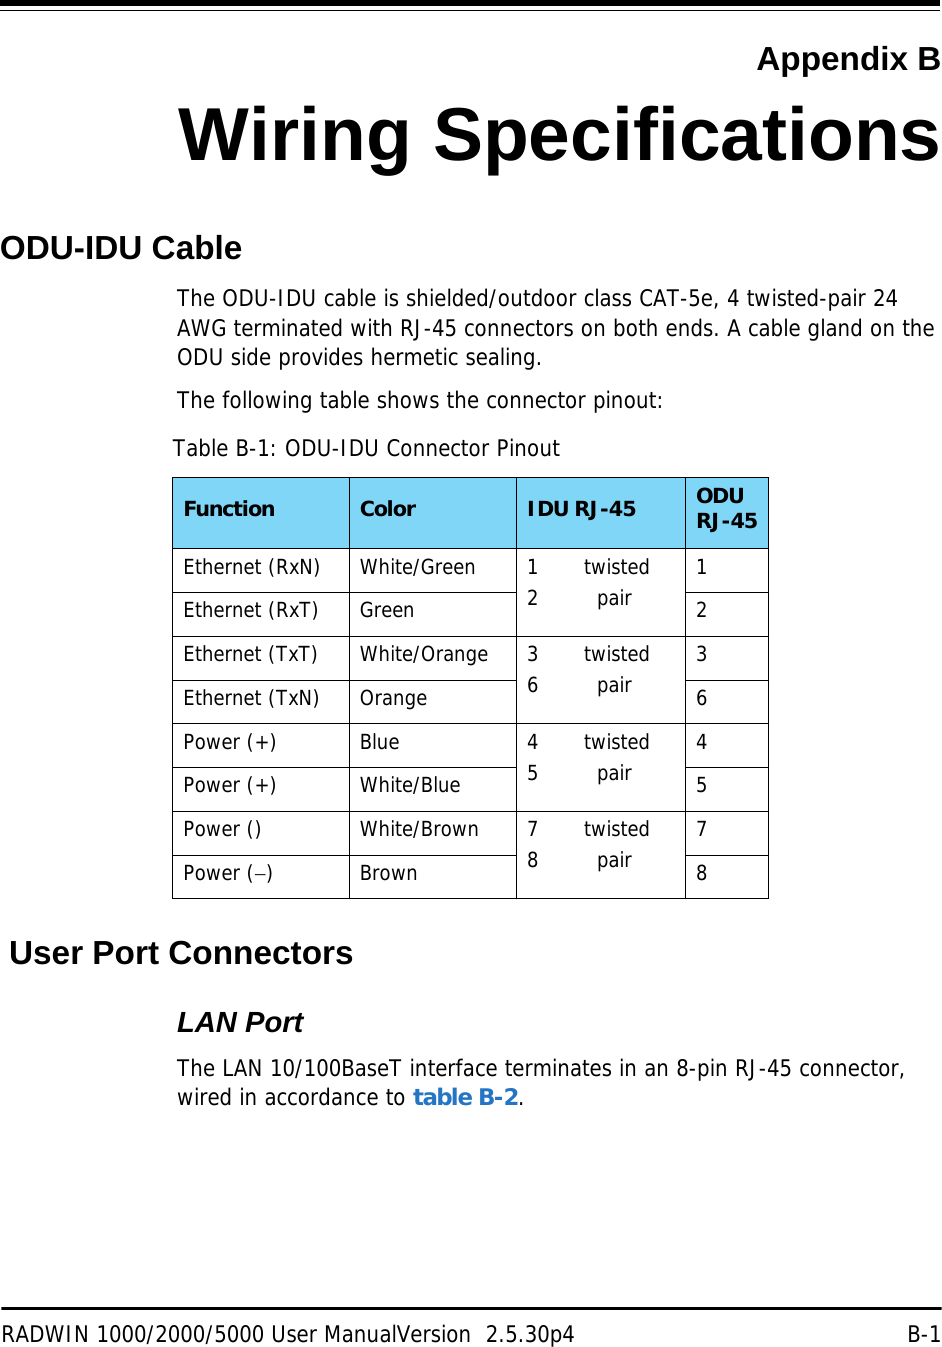 RADWIN 1000/2000/5000 User ManualVersion  2.5.30p4 B-1Appendix BWiring SpecificationsODU-IDU CableThe ODU-IDU cable is shielded/outdoor class CAT-5e, 4 twisted-pair 24 AWG terminated with RJ-45 connectors on both ends. A cable gland on the ODU side provides hermetic sealing.The following table shows the connector pinout: User Port ConnectorsLAN PortThe LAN 10/100BaseT interface terminates in an 8-pin RJ-45 connector, wired in accordance to table B-2.Table B-1: ODU-IDU Connector PinoutFunction Color IDU RJ-45 ODU RJ-45Ethernet (RxN) White/Green 1       twisted2         pair 1 Ethernet (RxT) Green 2 Ethernet (TxT) White/Orange 3       twisted6         pair 3 Ethernet (TxN) Orange 6 Power (+) Blue 4       twisted5         pair 4 Power (+) White/Blue 5 Power () White/Brown 7       twisted8         pair 7 Power () Brown 8 